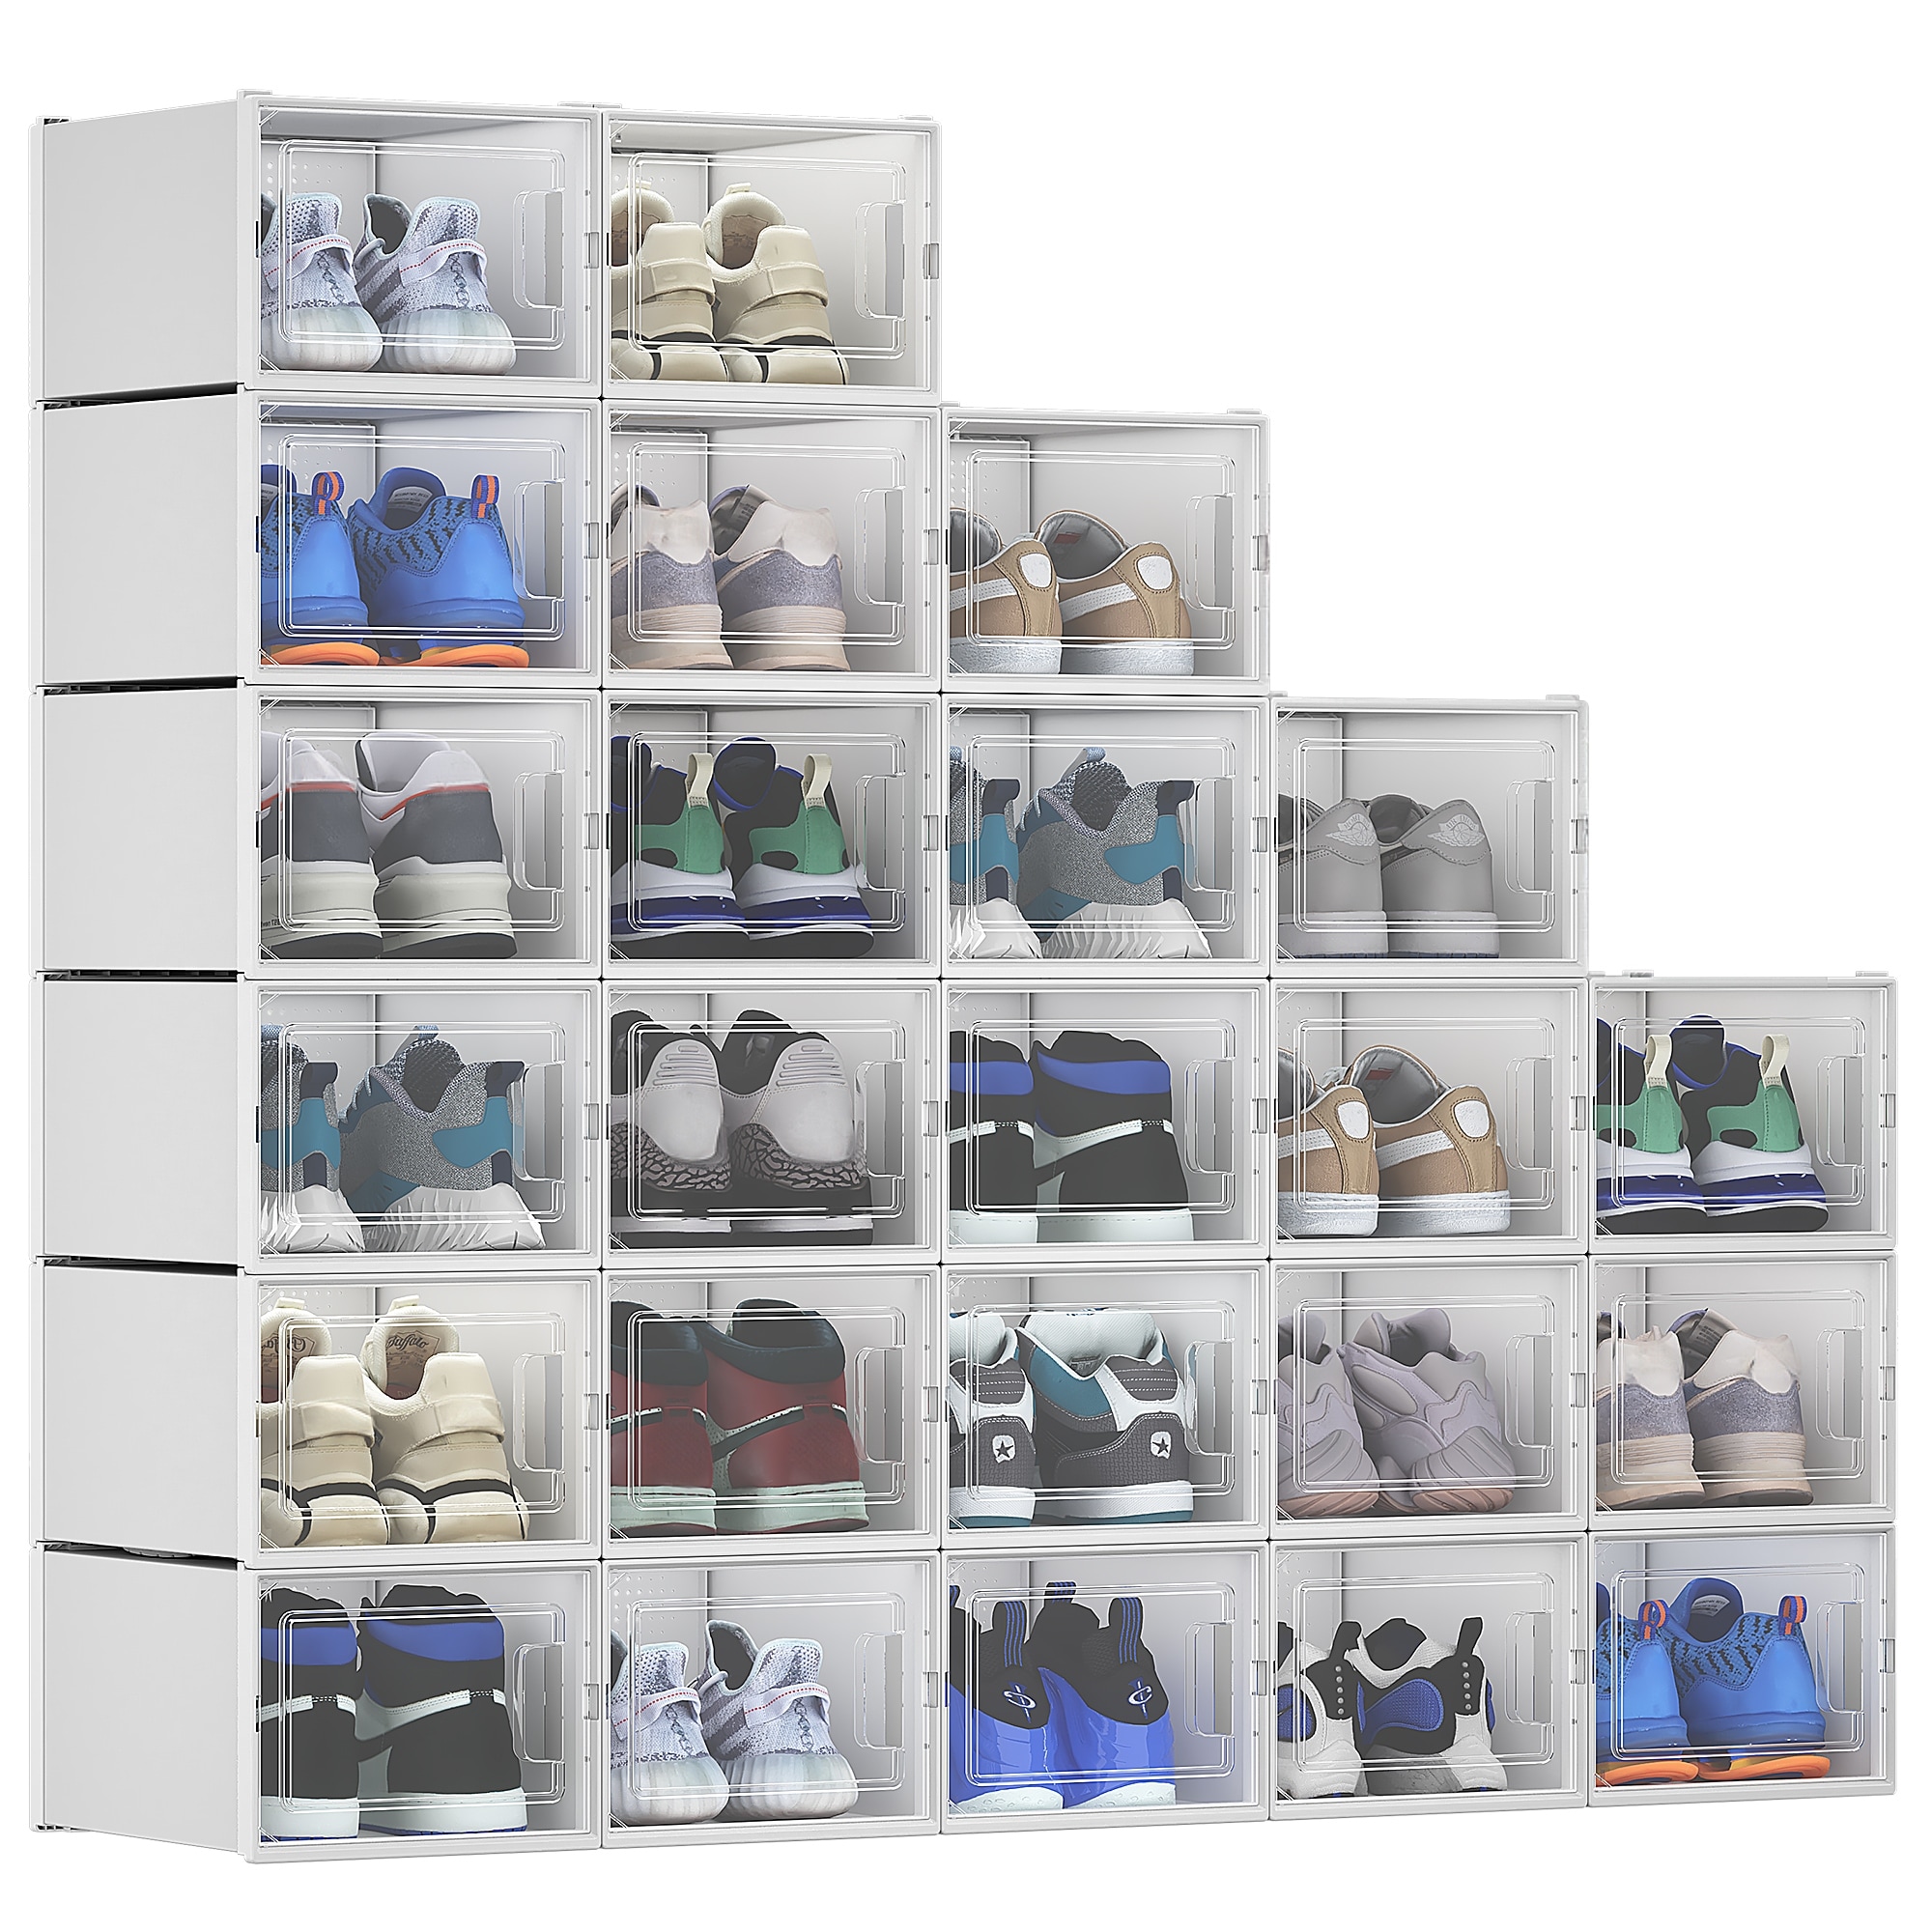  MMBABY 2 Set Shoe Storage Box, 1 Set of 6-Tier No Assembly  Stackable Shoe Organizer Storage Bins with Clear Door, Free Standing Shoe  Shelf Cabinet with Lids, Plastic Shoe Rack for